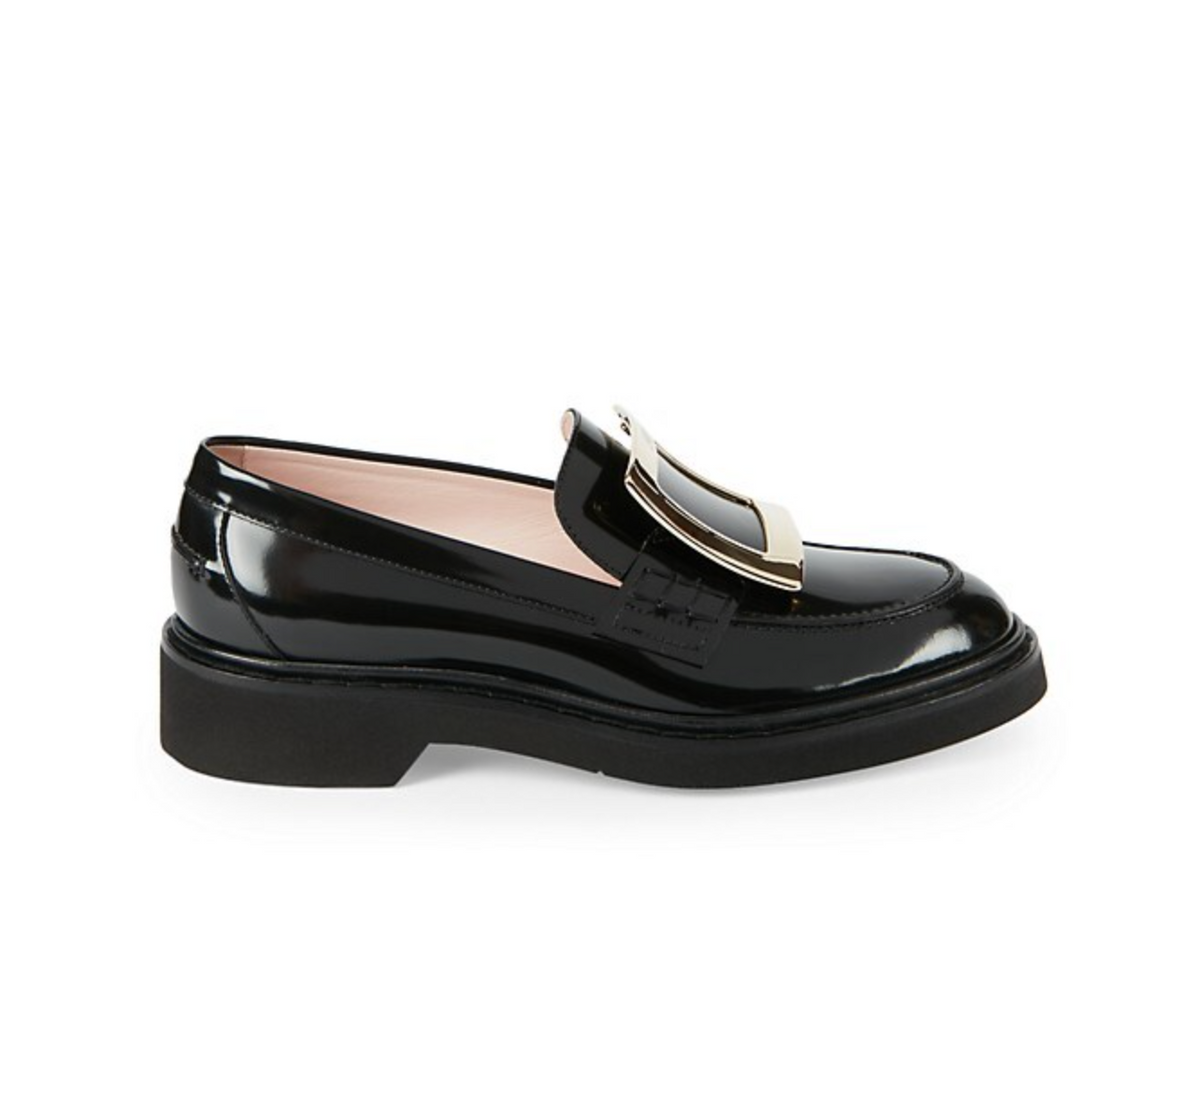 Viv Rangers Patent Leather Loafers